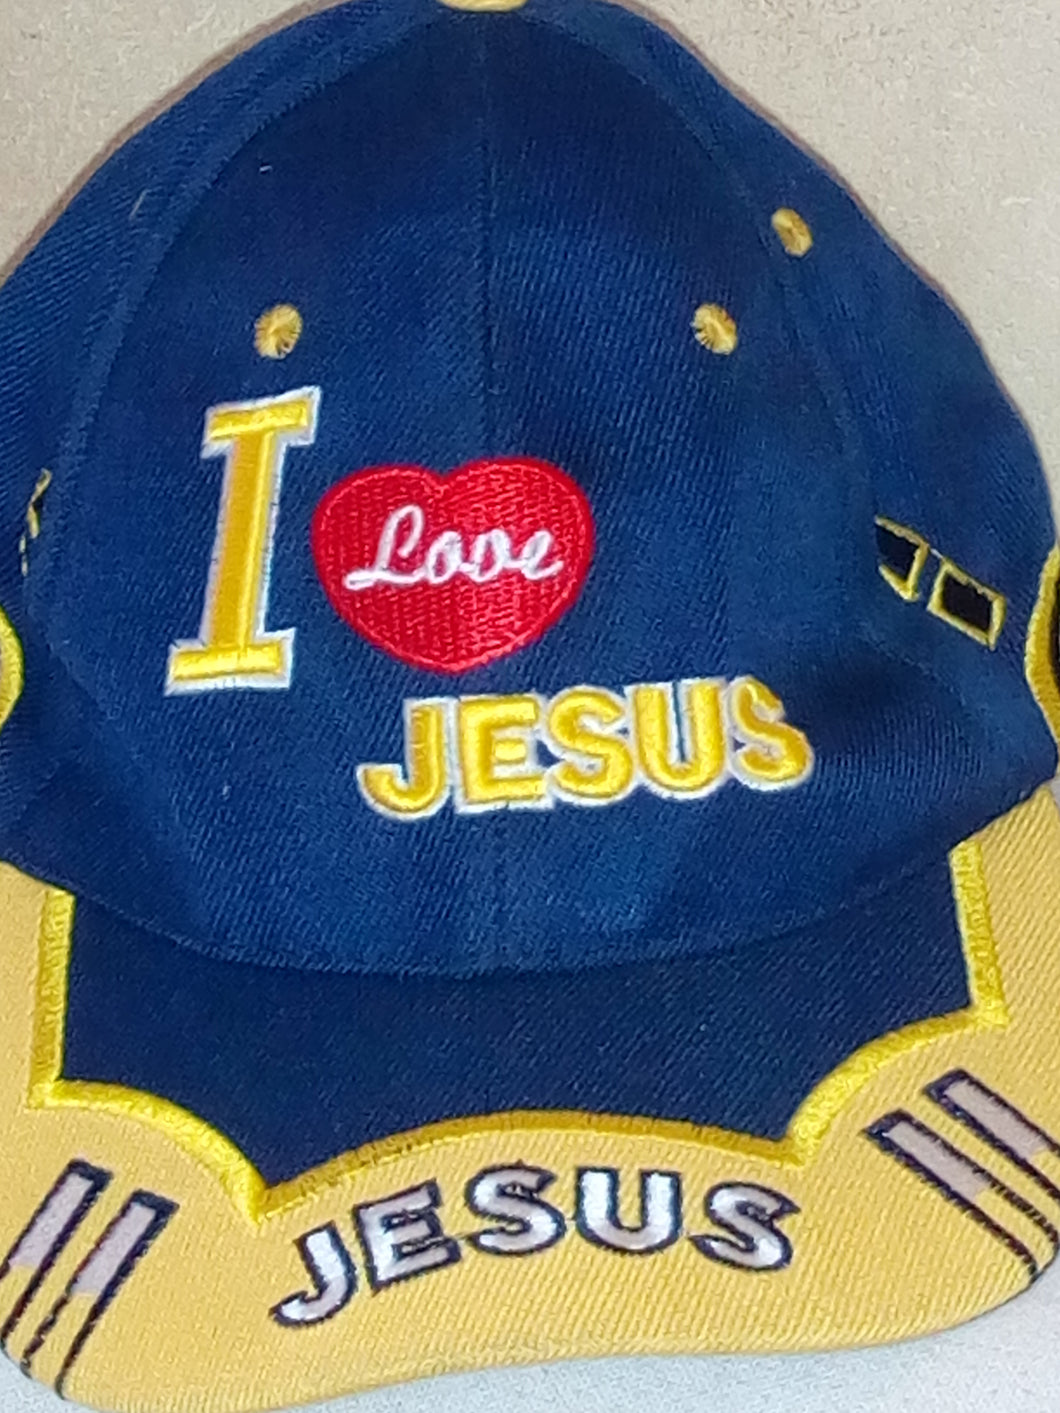 Cap inscribed with 